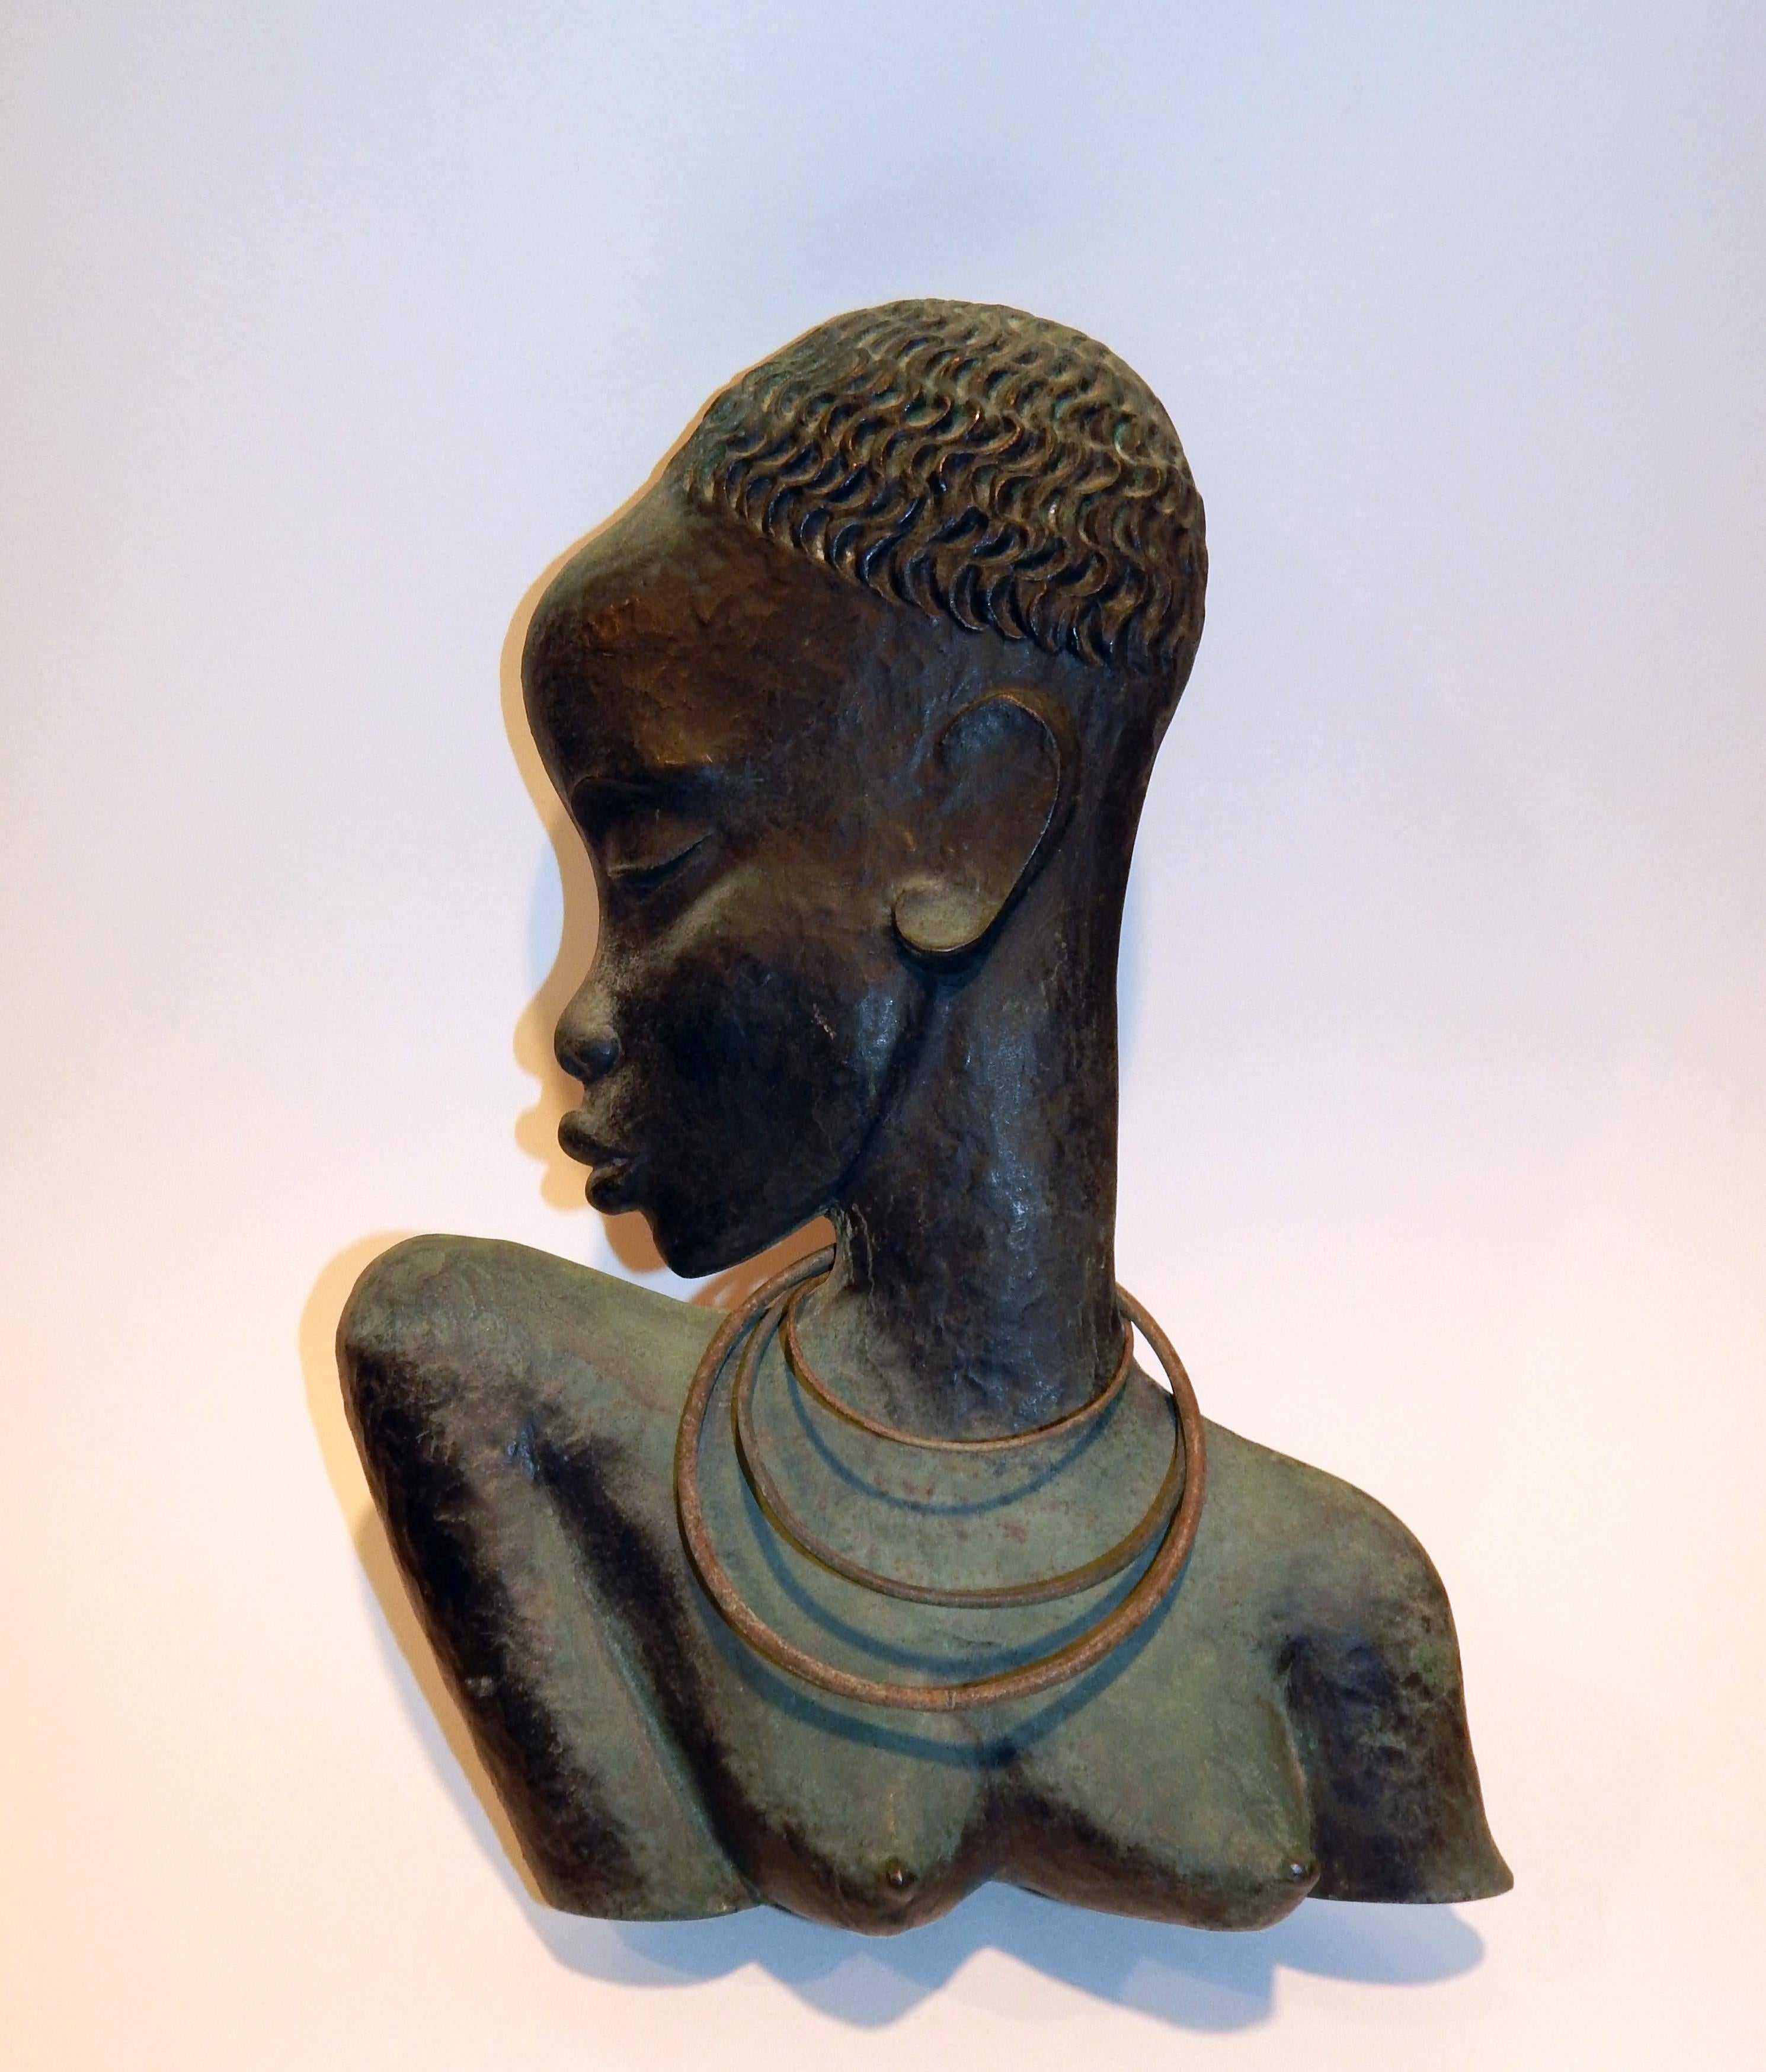 This wonderful Wiener Werkstatte bronze by Hagenauer depicts
the bust of an African Female.
It measures 14.5" H x 10" W x 3" D and bears the rare "Rena" mark.
This piece was made to be sold out of Rena Rosenthal's